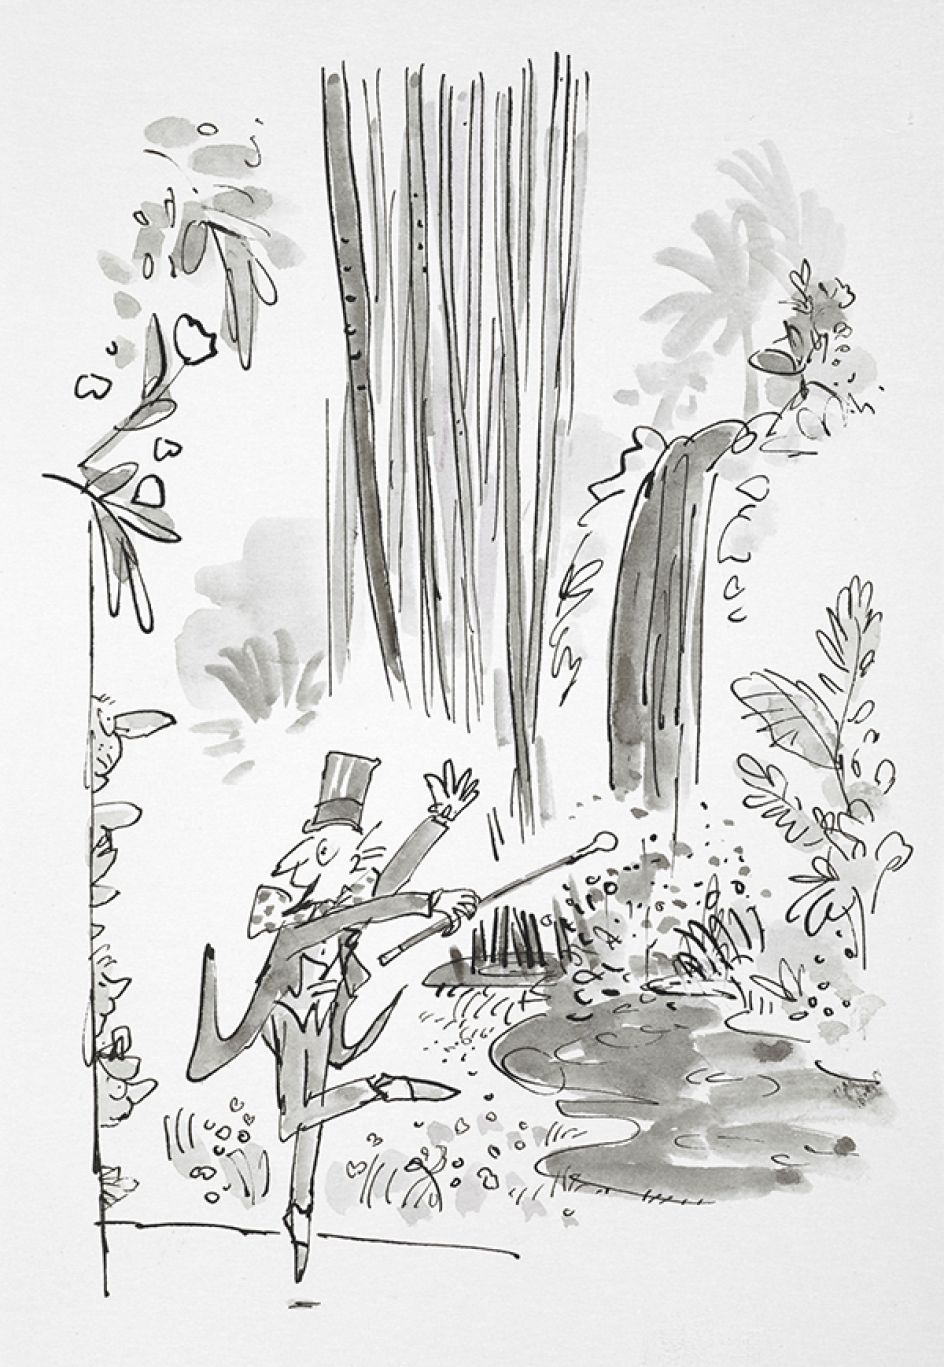 Charlie and the Chocolate Factory by Roald Dahl original artwork, illustrations (c) Quentin Blake